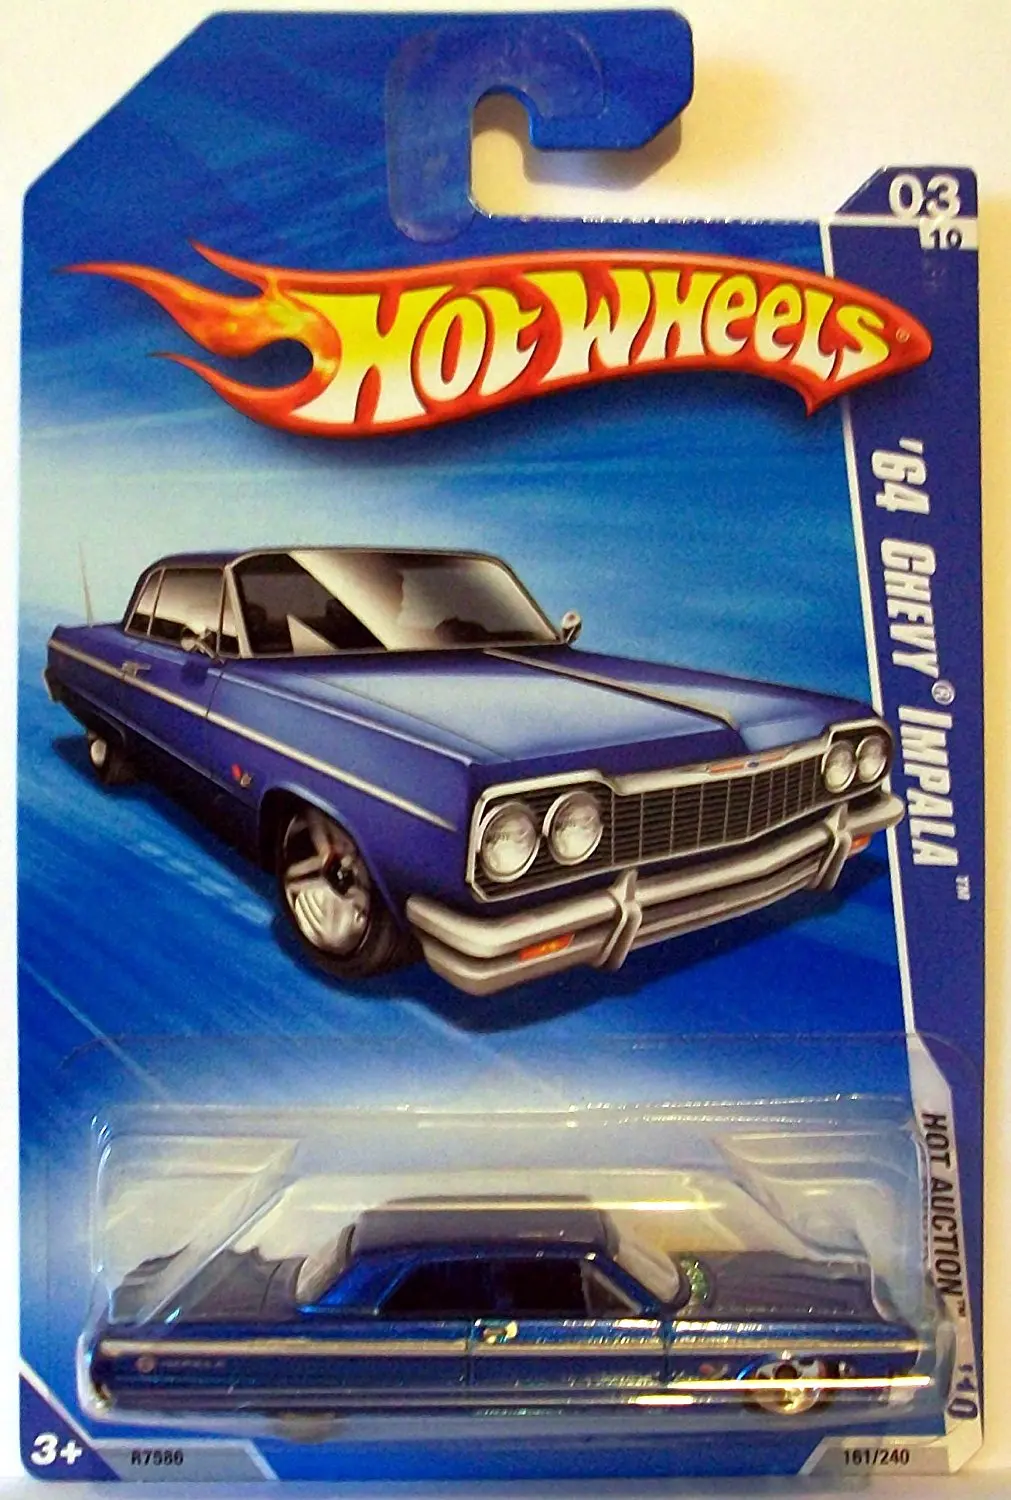 Hot Wheels 2010-161 BLUE '64 Chevy Impala Hot Auction 1:64 Scale.